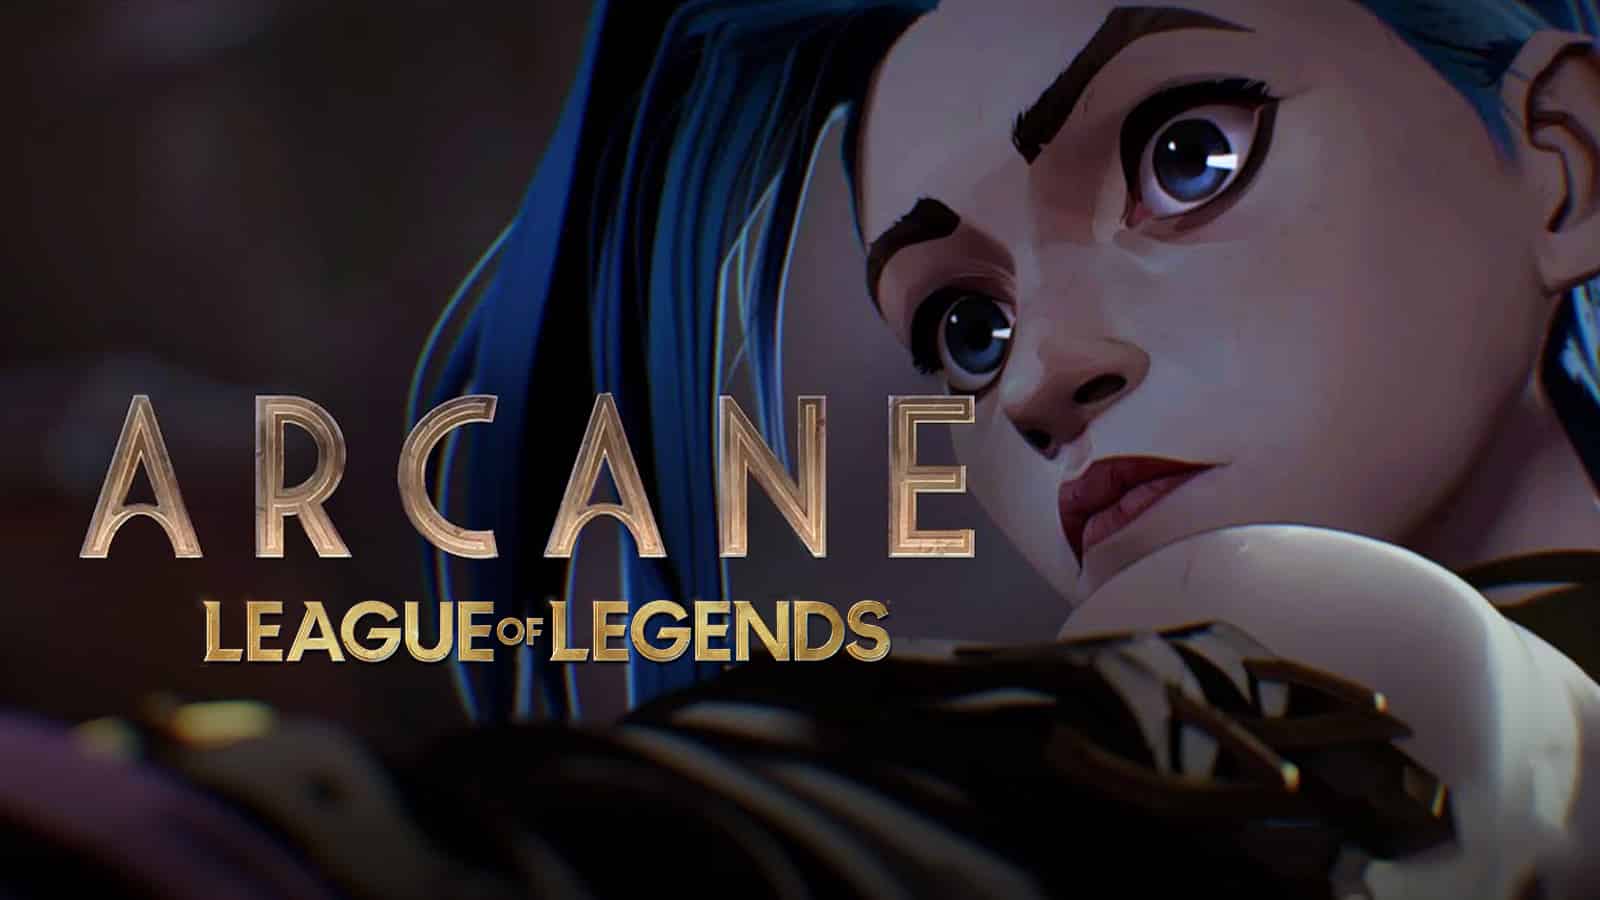 Netflix and Riot Games announced Season 2 of Arcane series is on its way